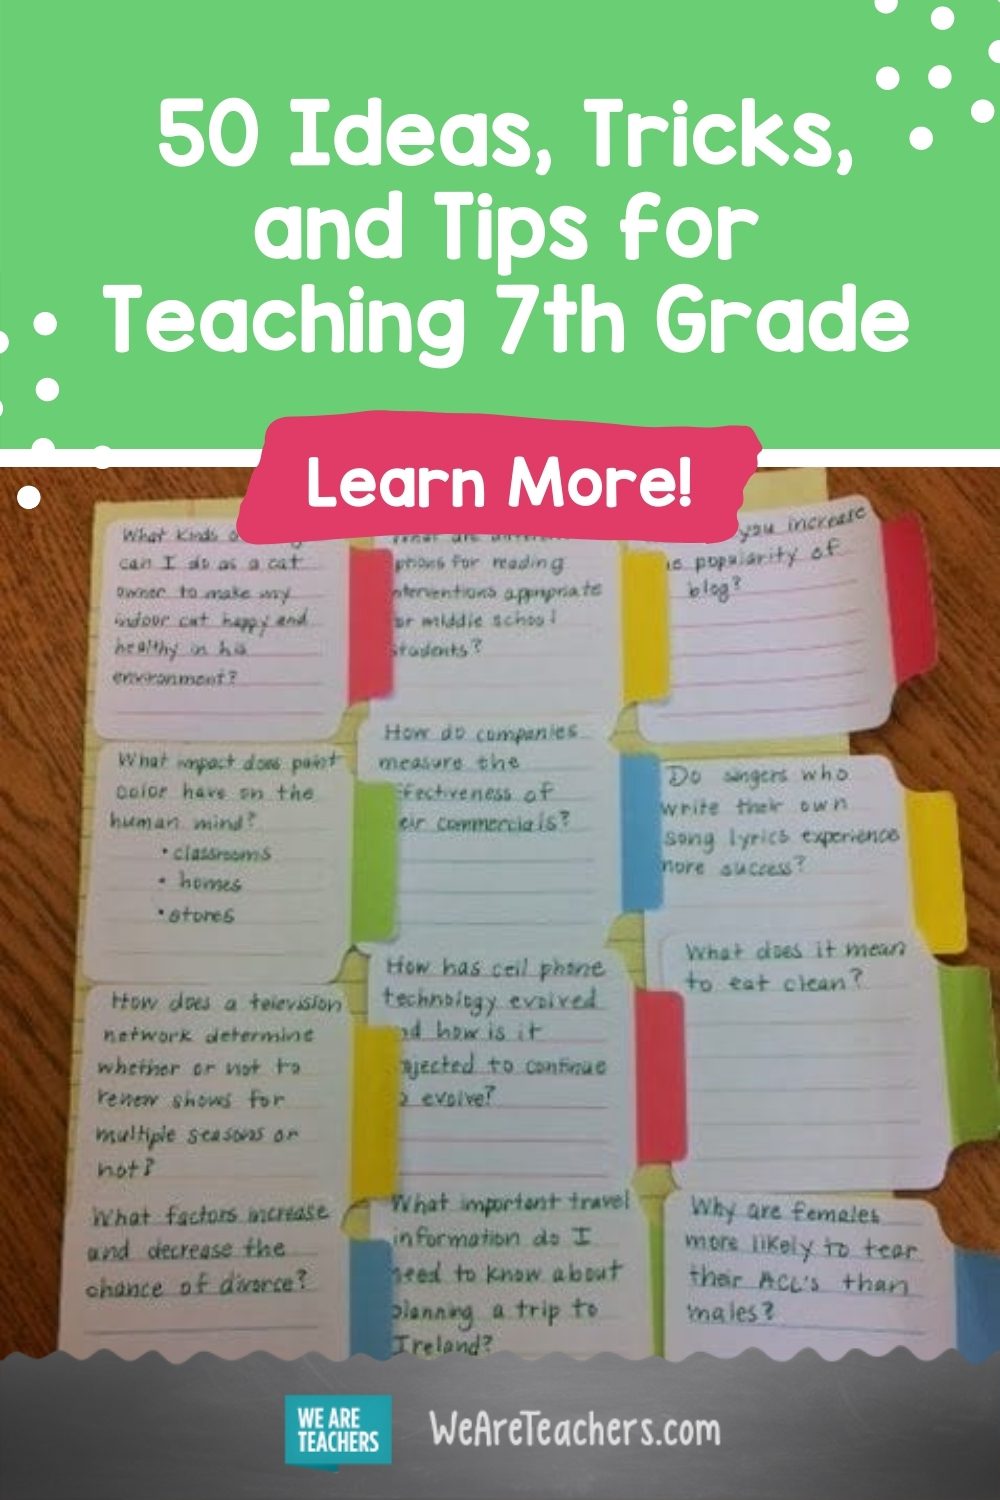 50-ideas-tricks-and-tips-for-teaching-7th-grade-we-are-teachers